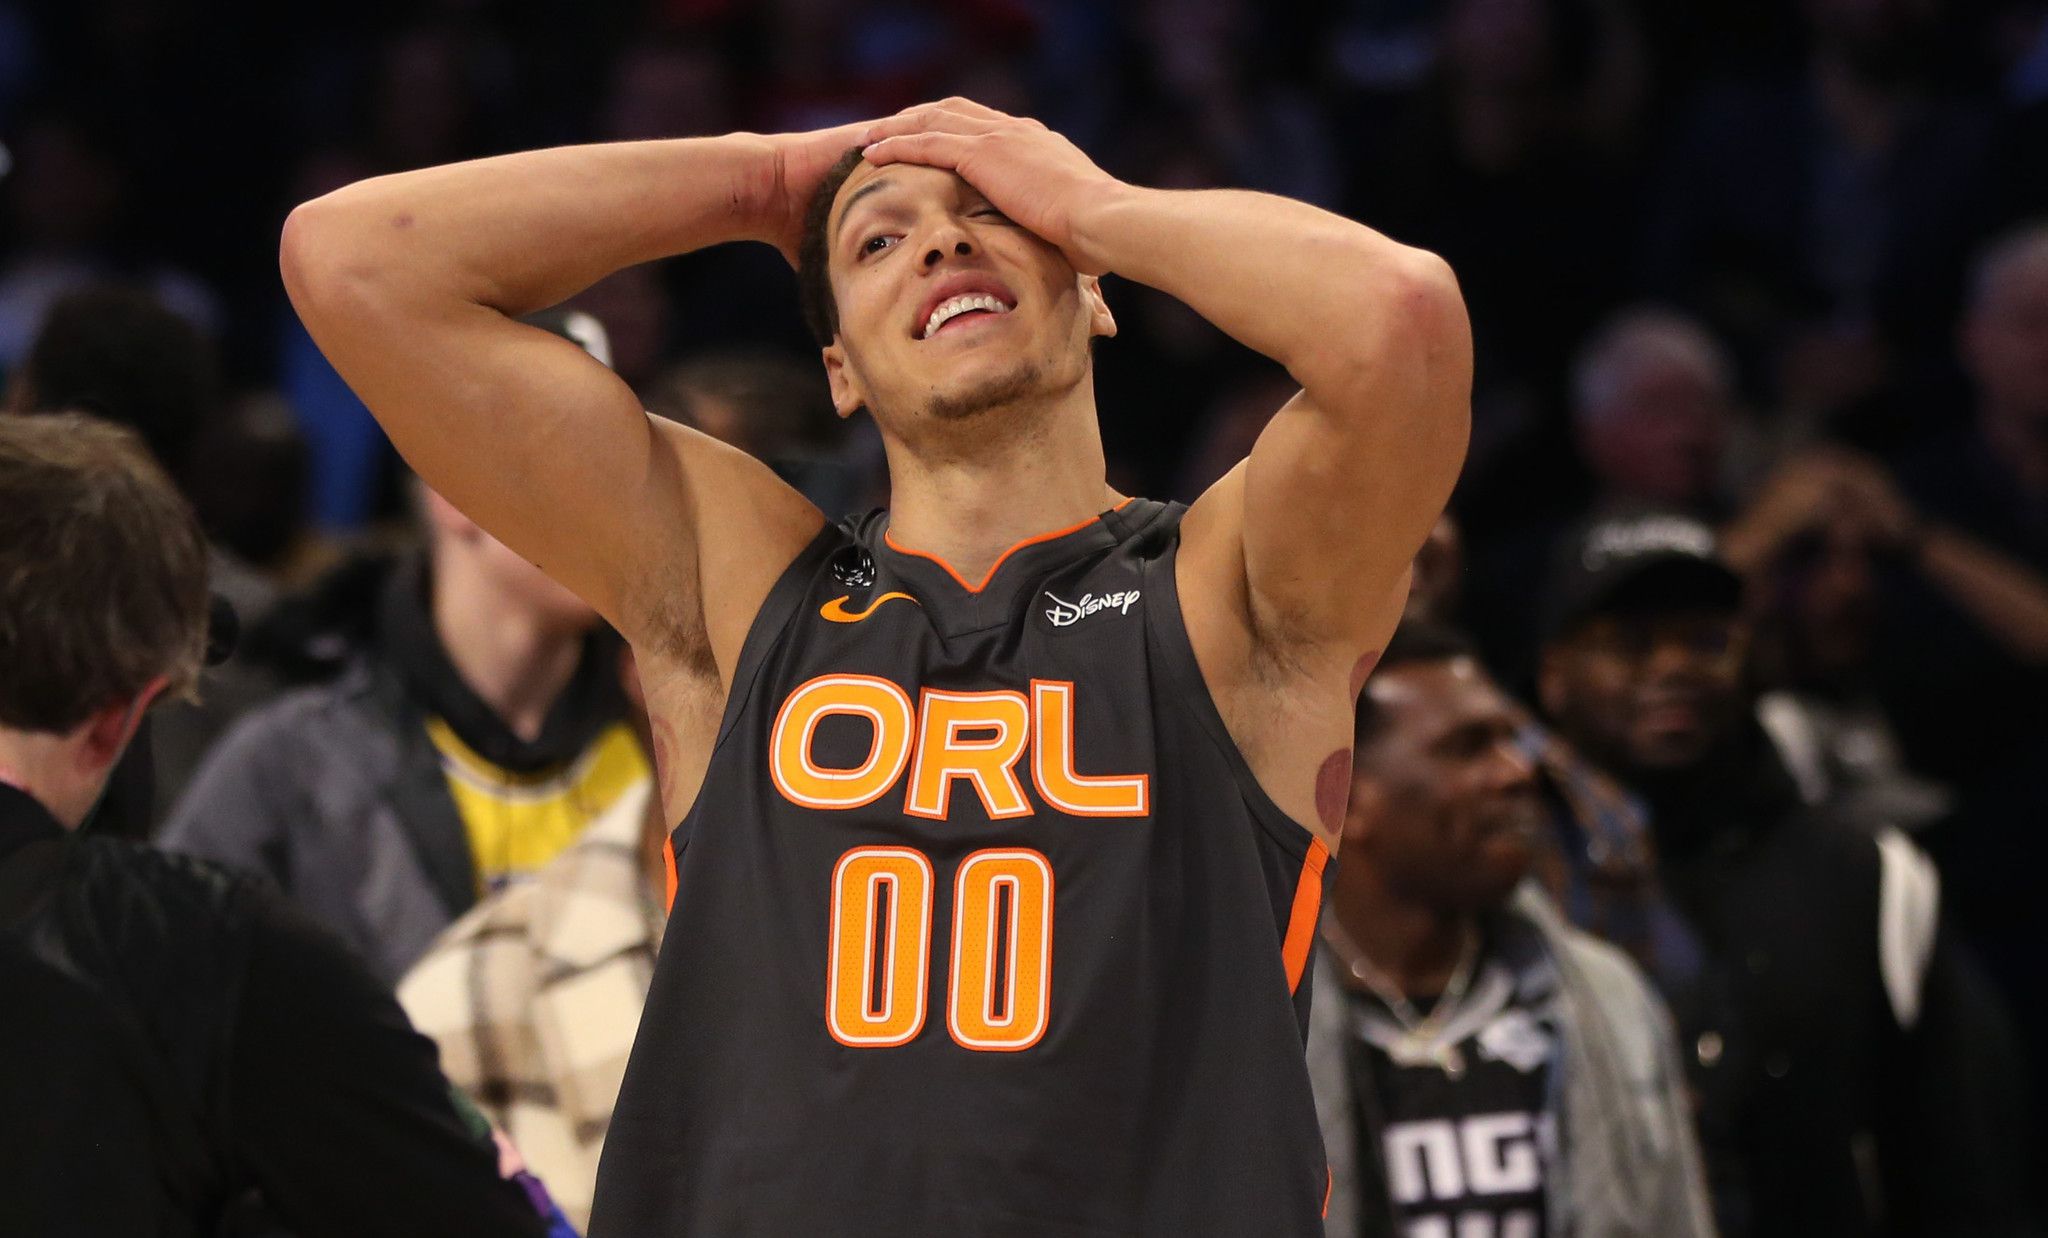 Aaron Gordon looking for redemption in 2020 NBA Slam Dunk Contest